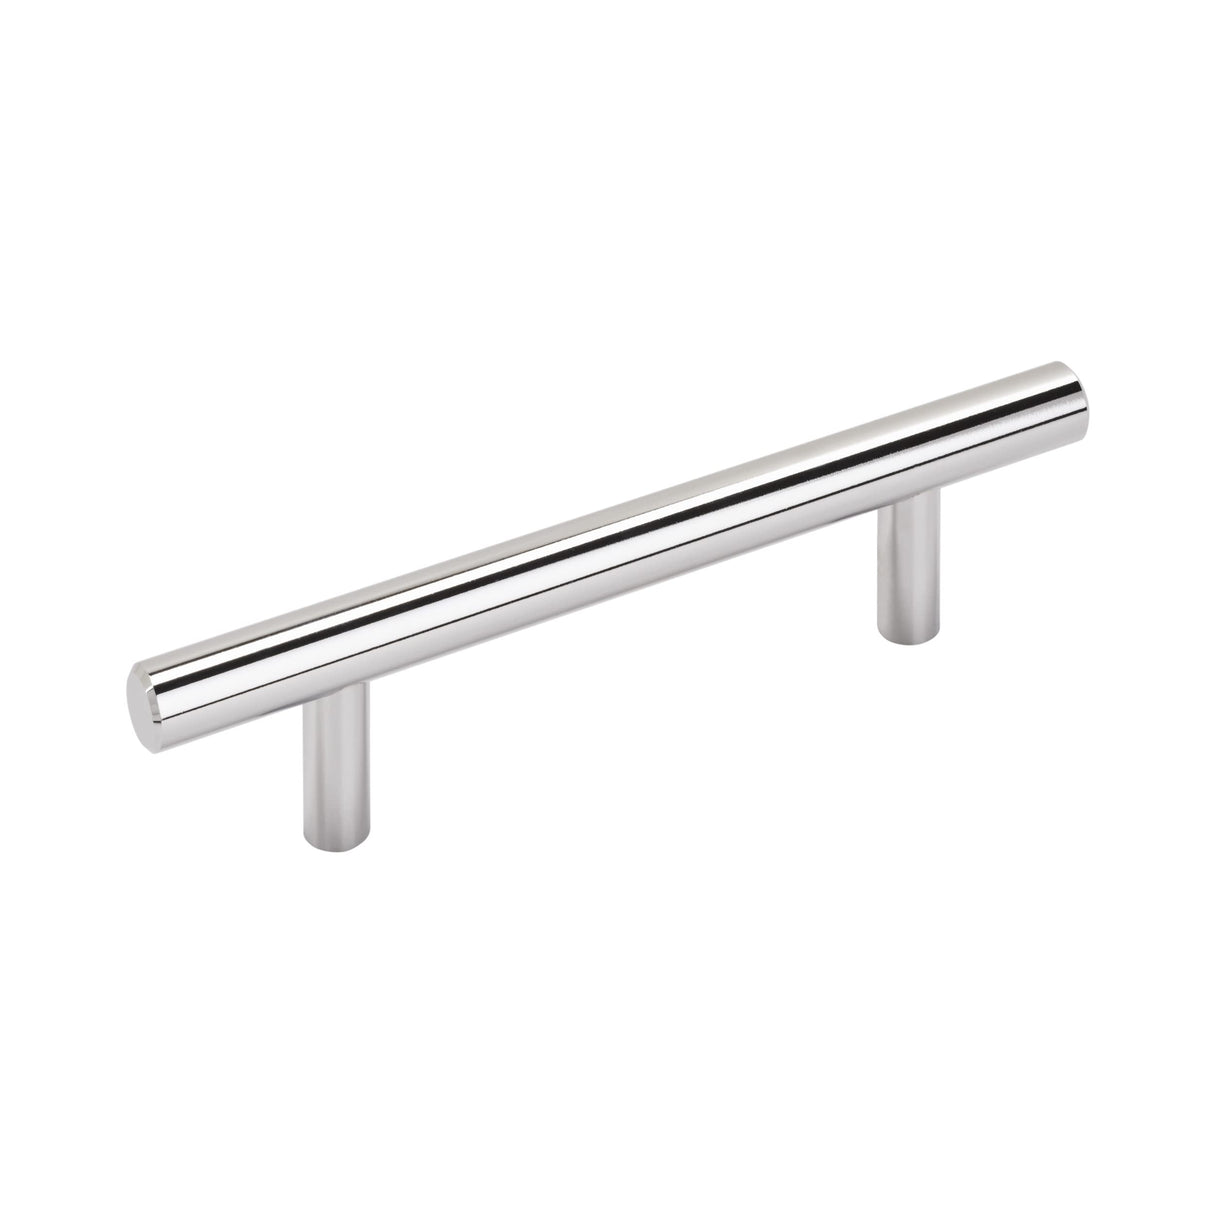 Amerock Cabinet Pull Polished Chrome 3-3/4 inch (96 mm) Center to Center Bar Pulls 1 Pack Drawer Pull Drawer Handle Cabinet Hardware